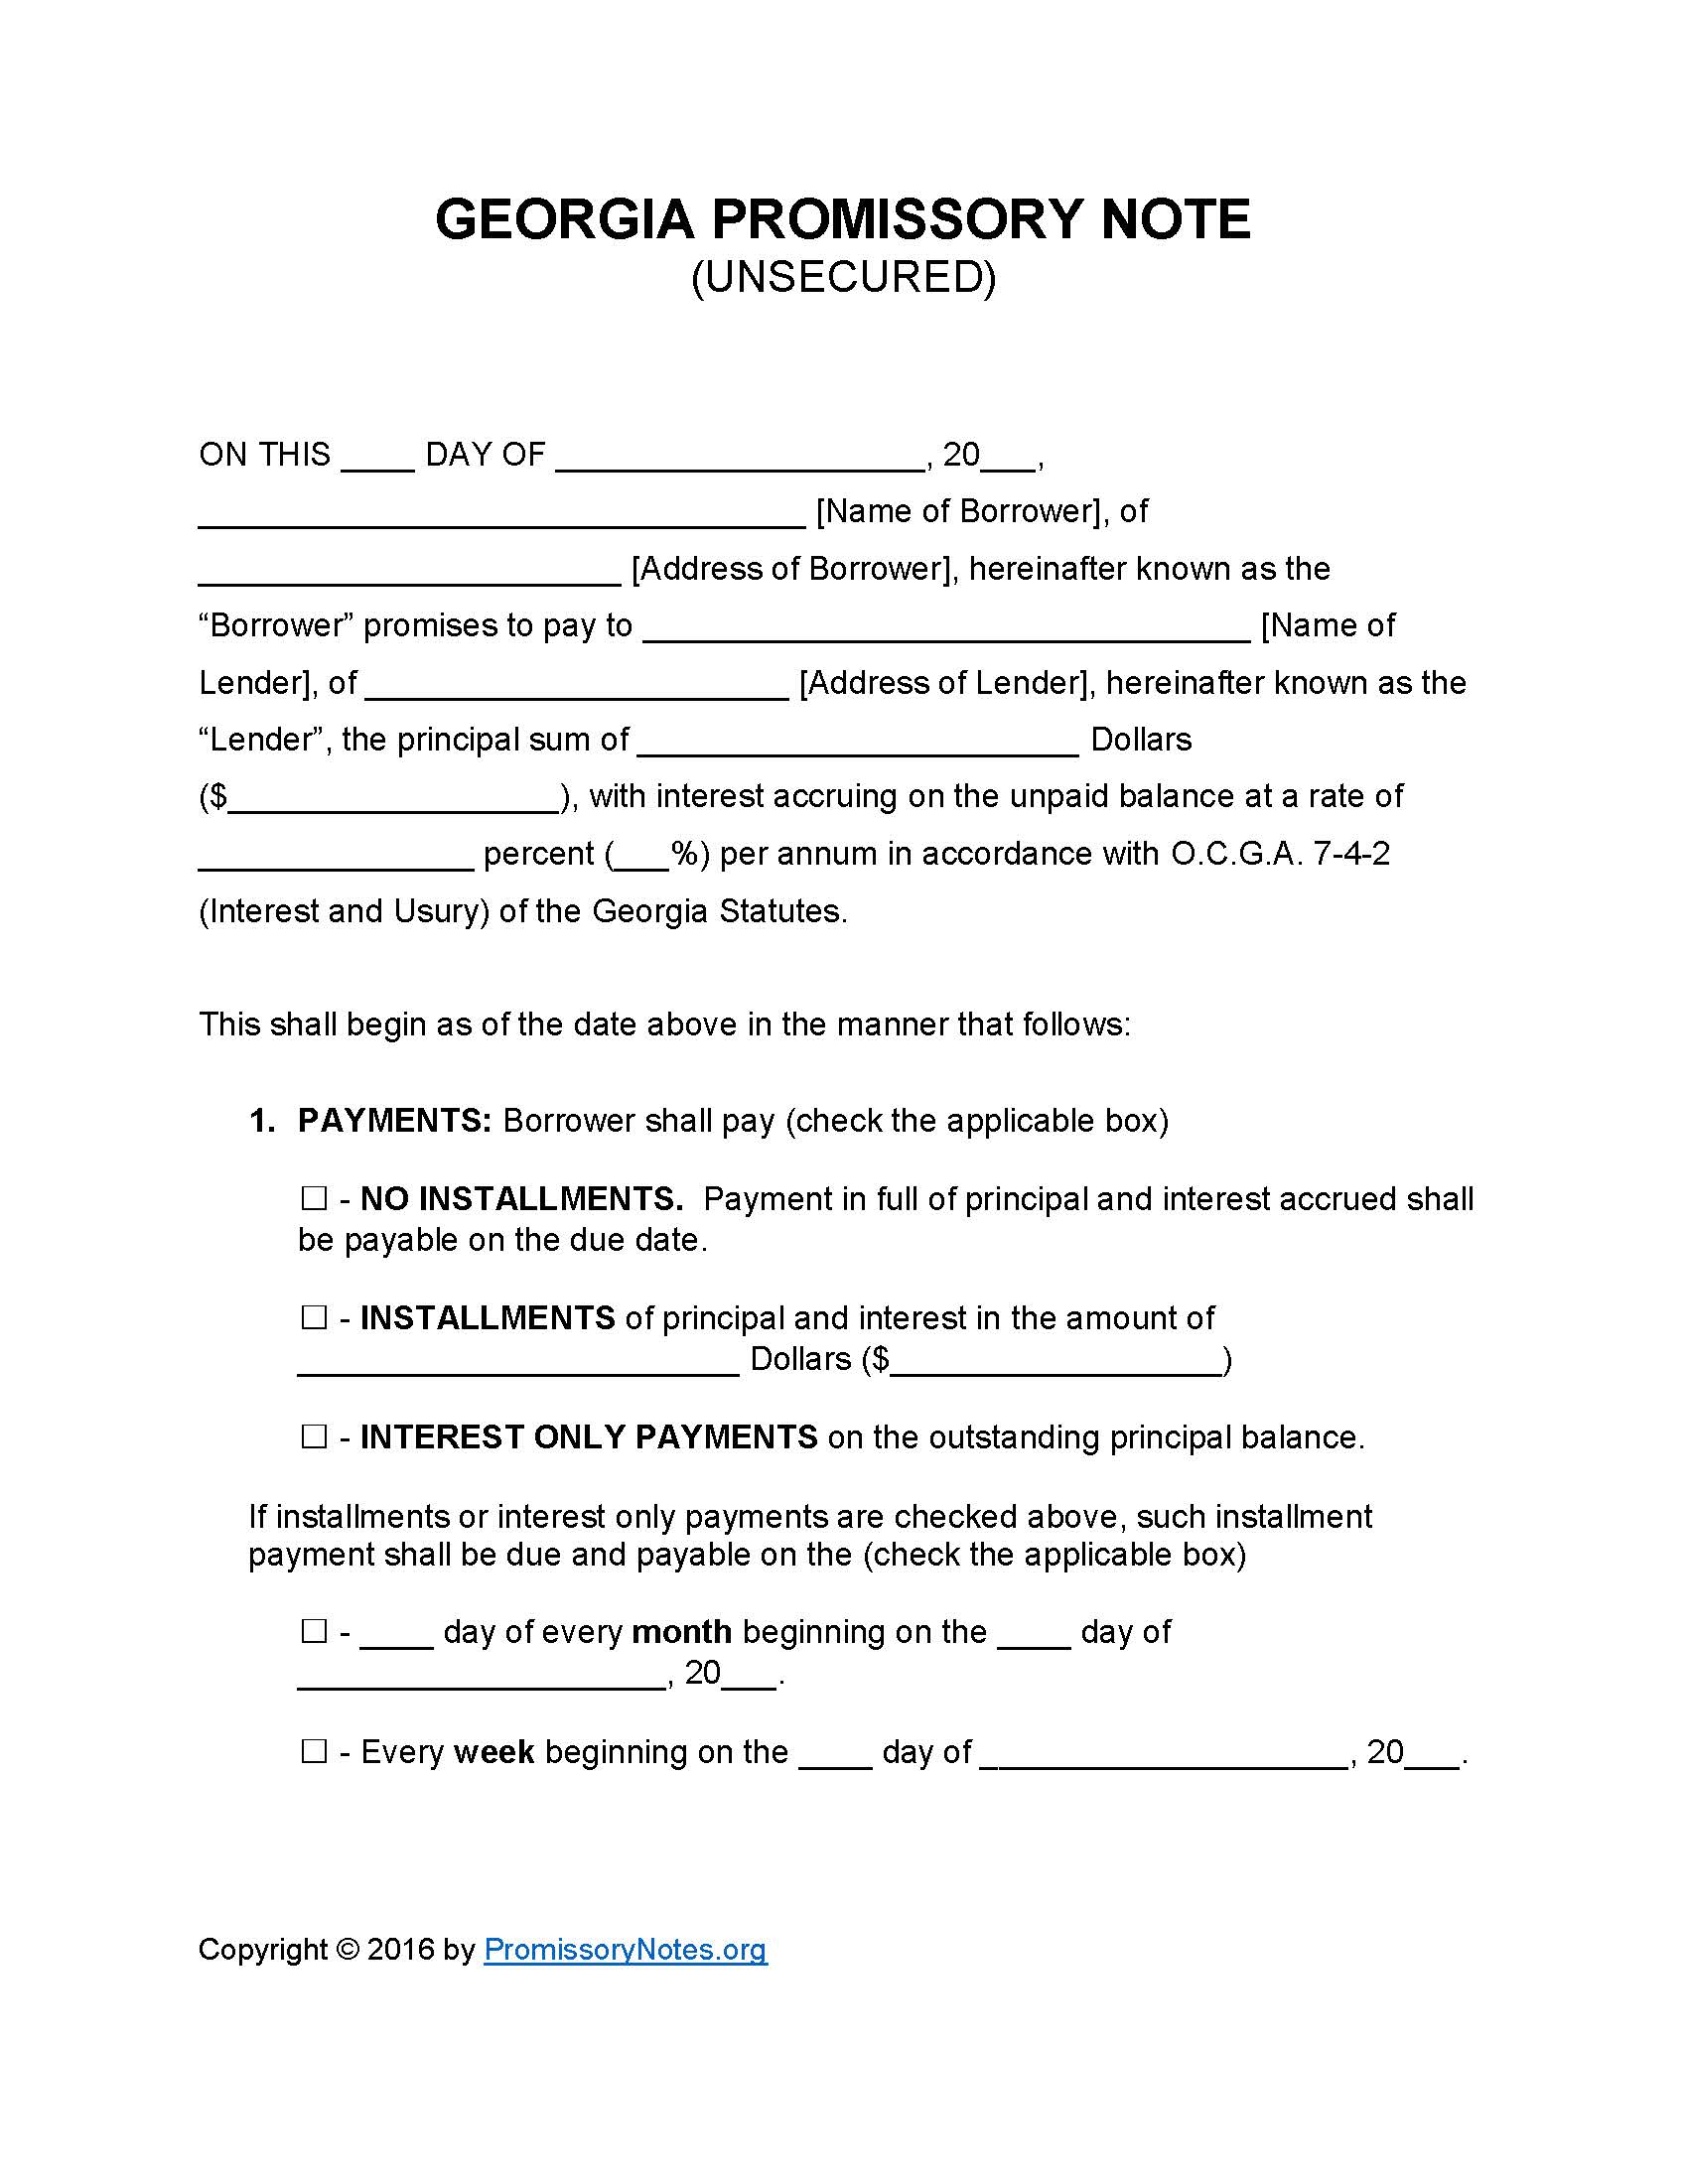 Georgia Unsecured Promissory Note Template - Promissory Notes Throughout Note Payable Template